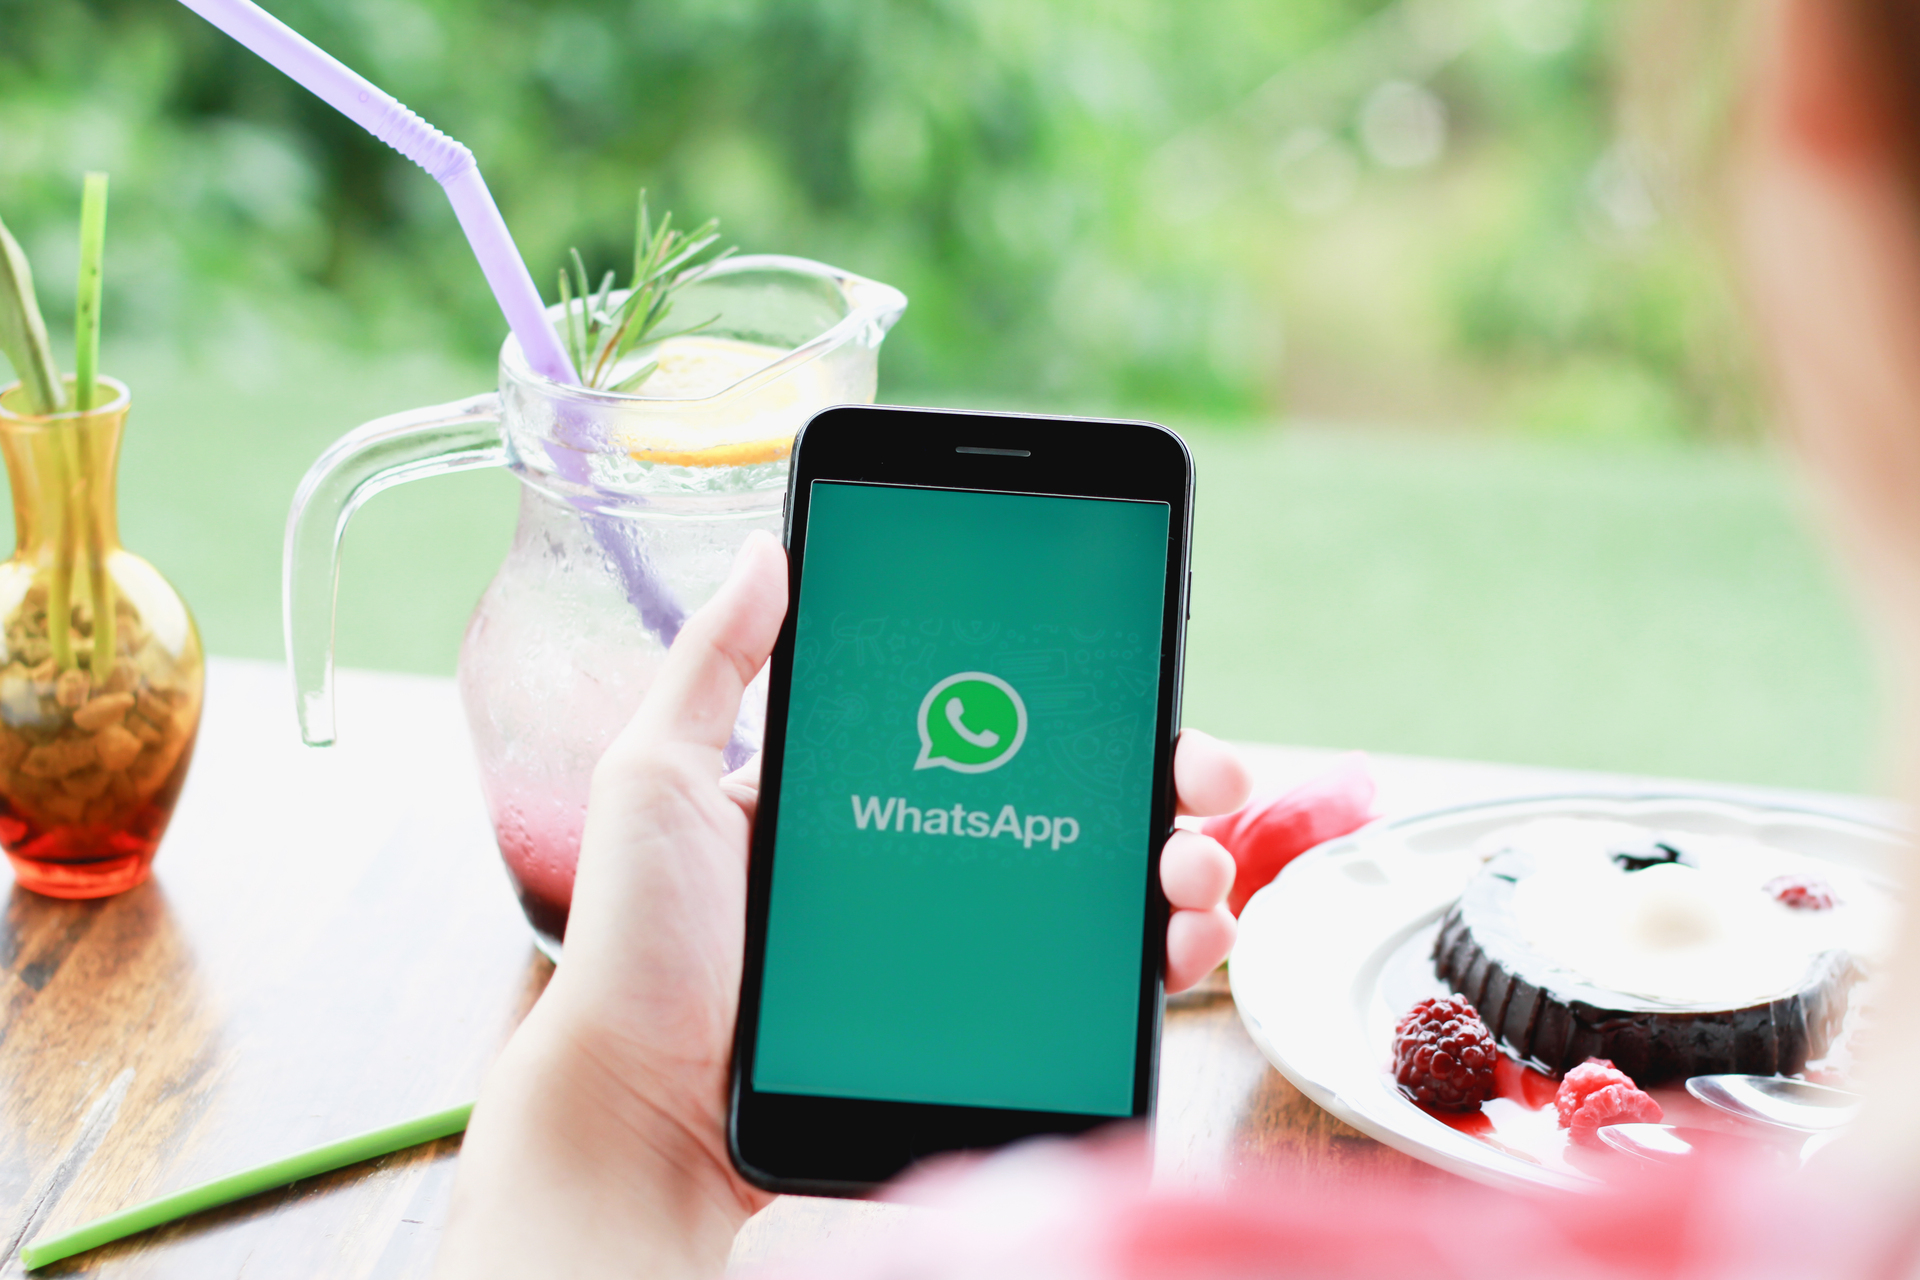 Close-up image of a mobile phone screen featuring the WhatsApp messaging application. Various chat bubbles and timestamps reveal an active conversation history, while the green WhatsApp logo is prominently displayed